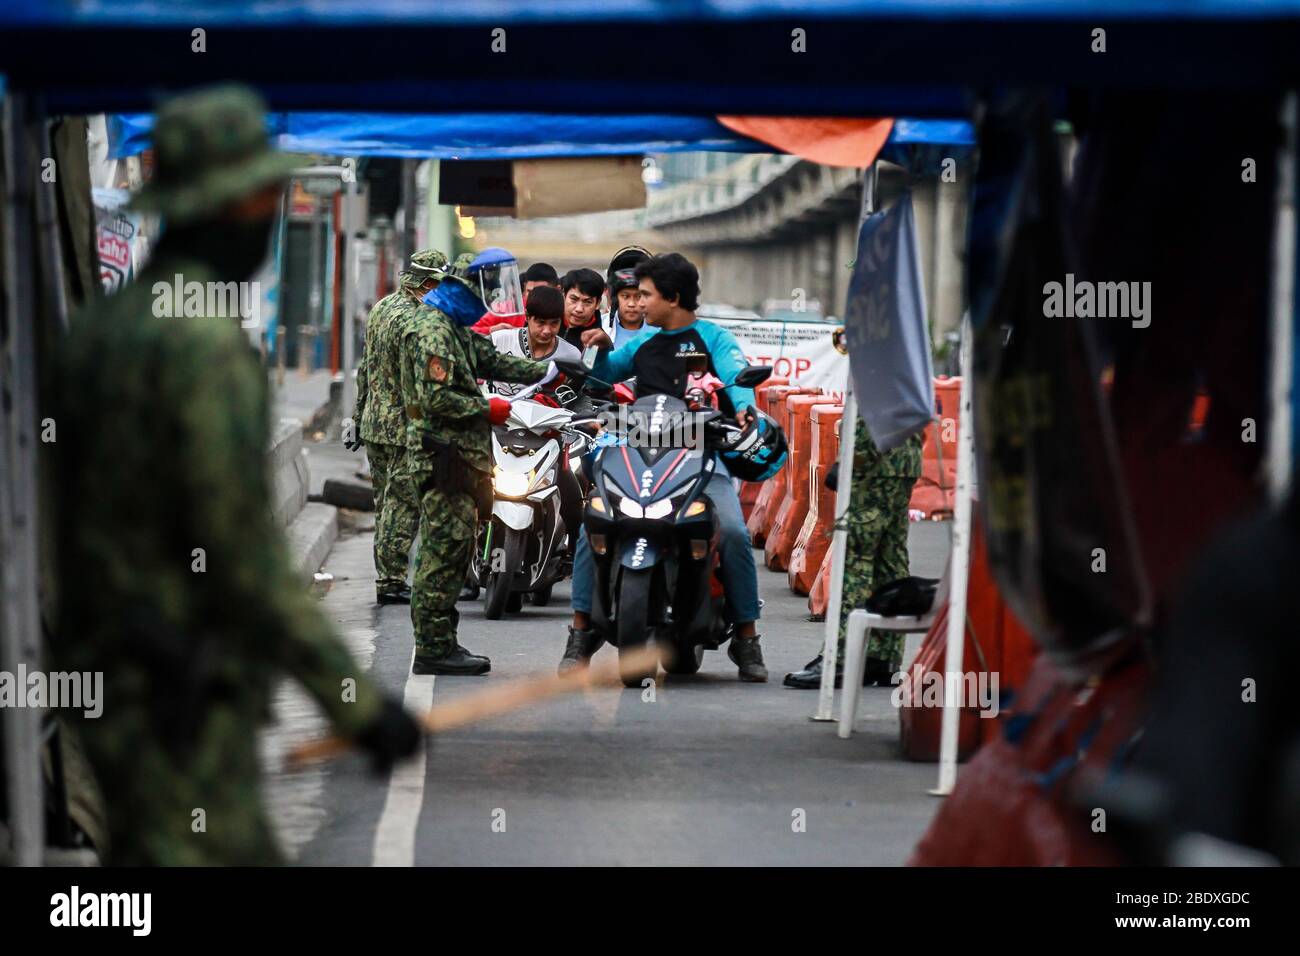 Antipolo City, Philippines. 10th Apr, 2020. Police inspect motorists at a checkpoint in Antipolo City, the Philippines, on April 10, 2020. The Department of Health (DOH) of the Philippines on Friday reported 119 new confirmed COVID-19 cases, bringing the total number to 4,195. Credit: Rouelle Umali/Xinhua/Alamy Live News Stock Photo